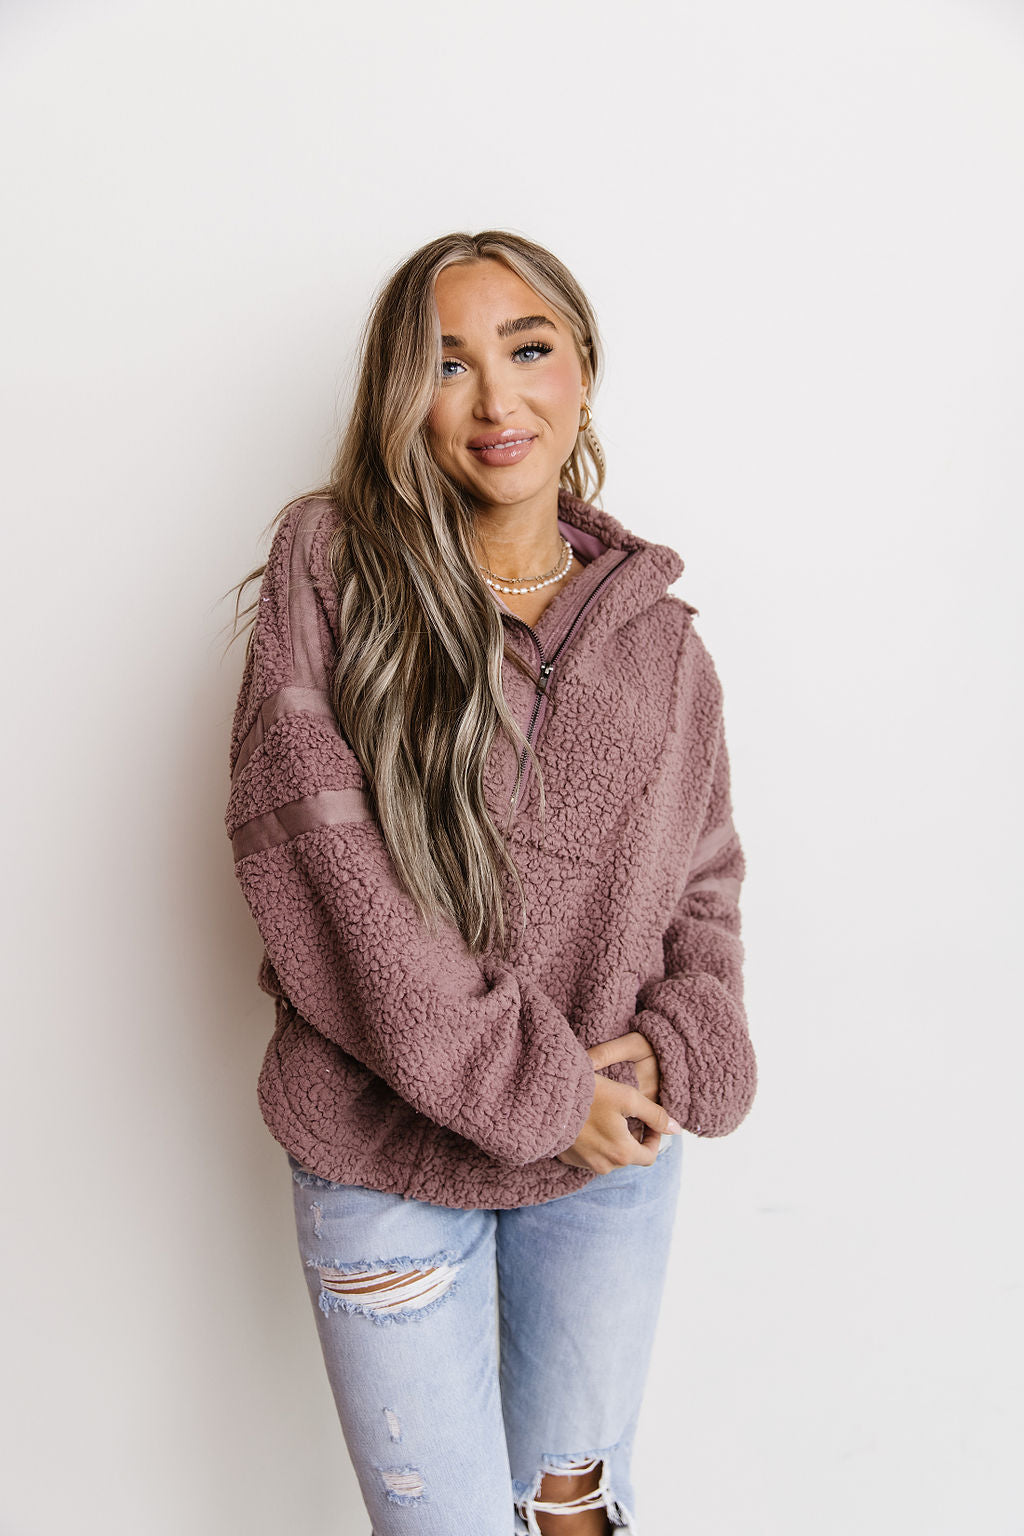 Ampersand Avenue Fluffy Pullover - Mauve